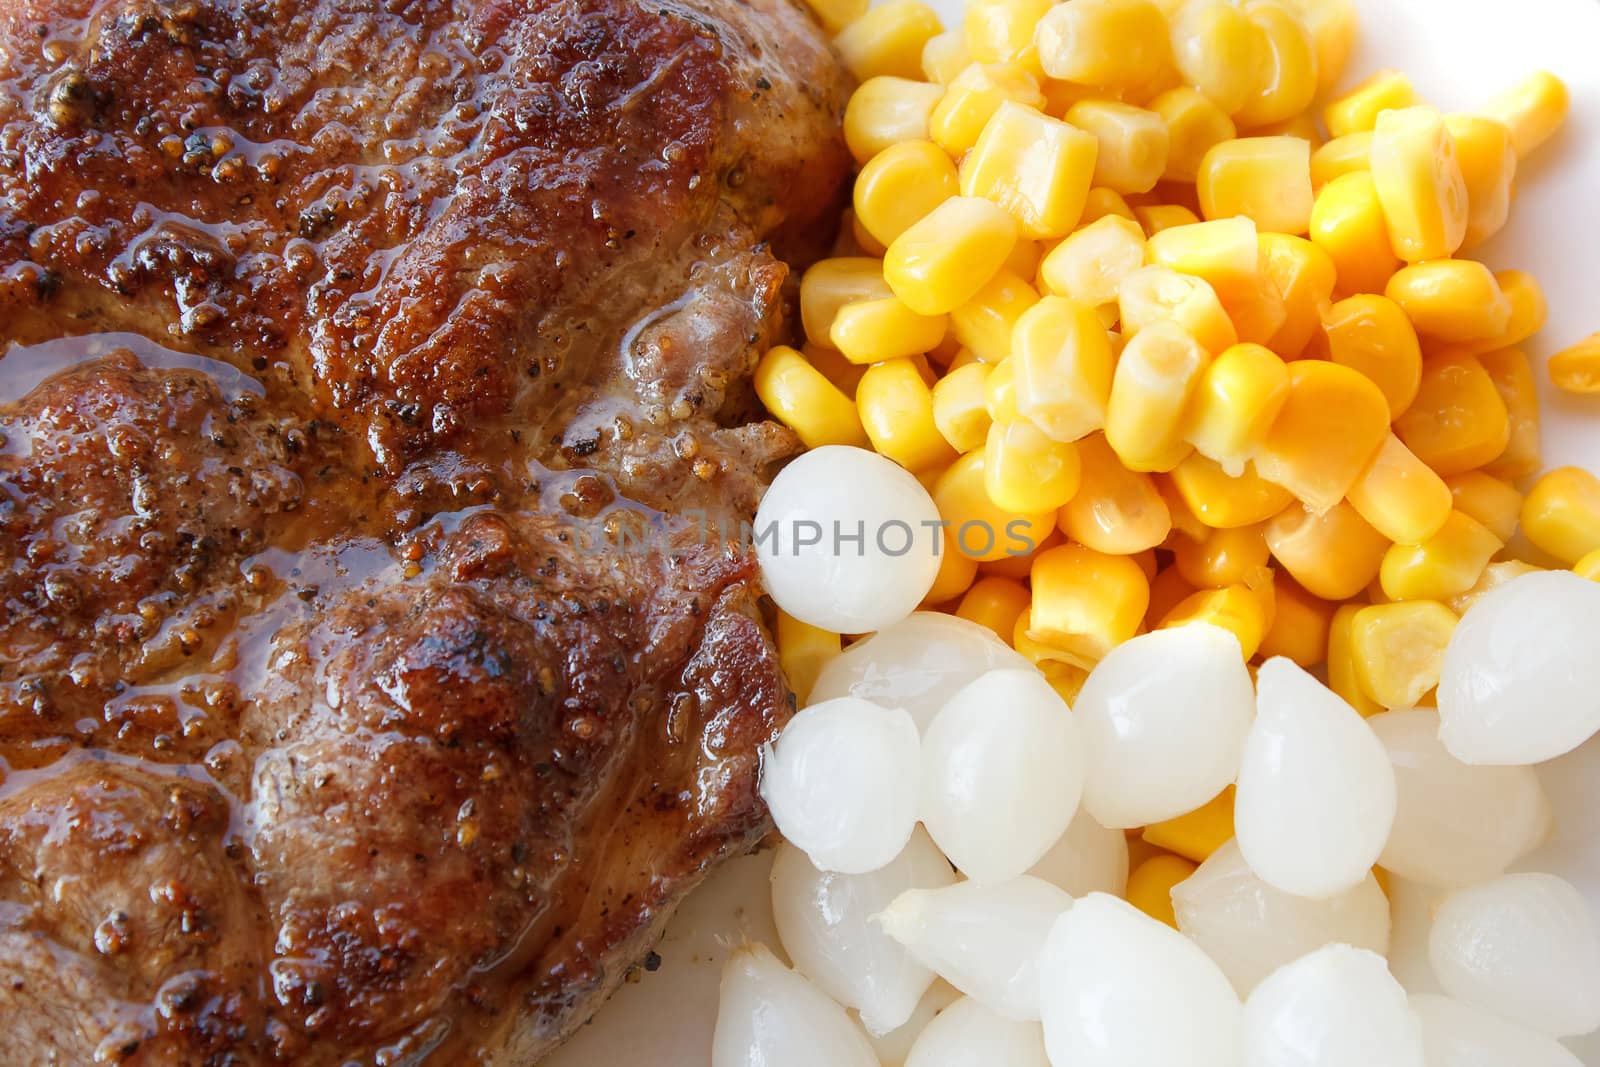 grilled pork steak with corn and small onions on plate